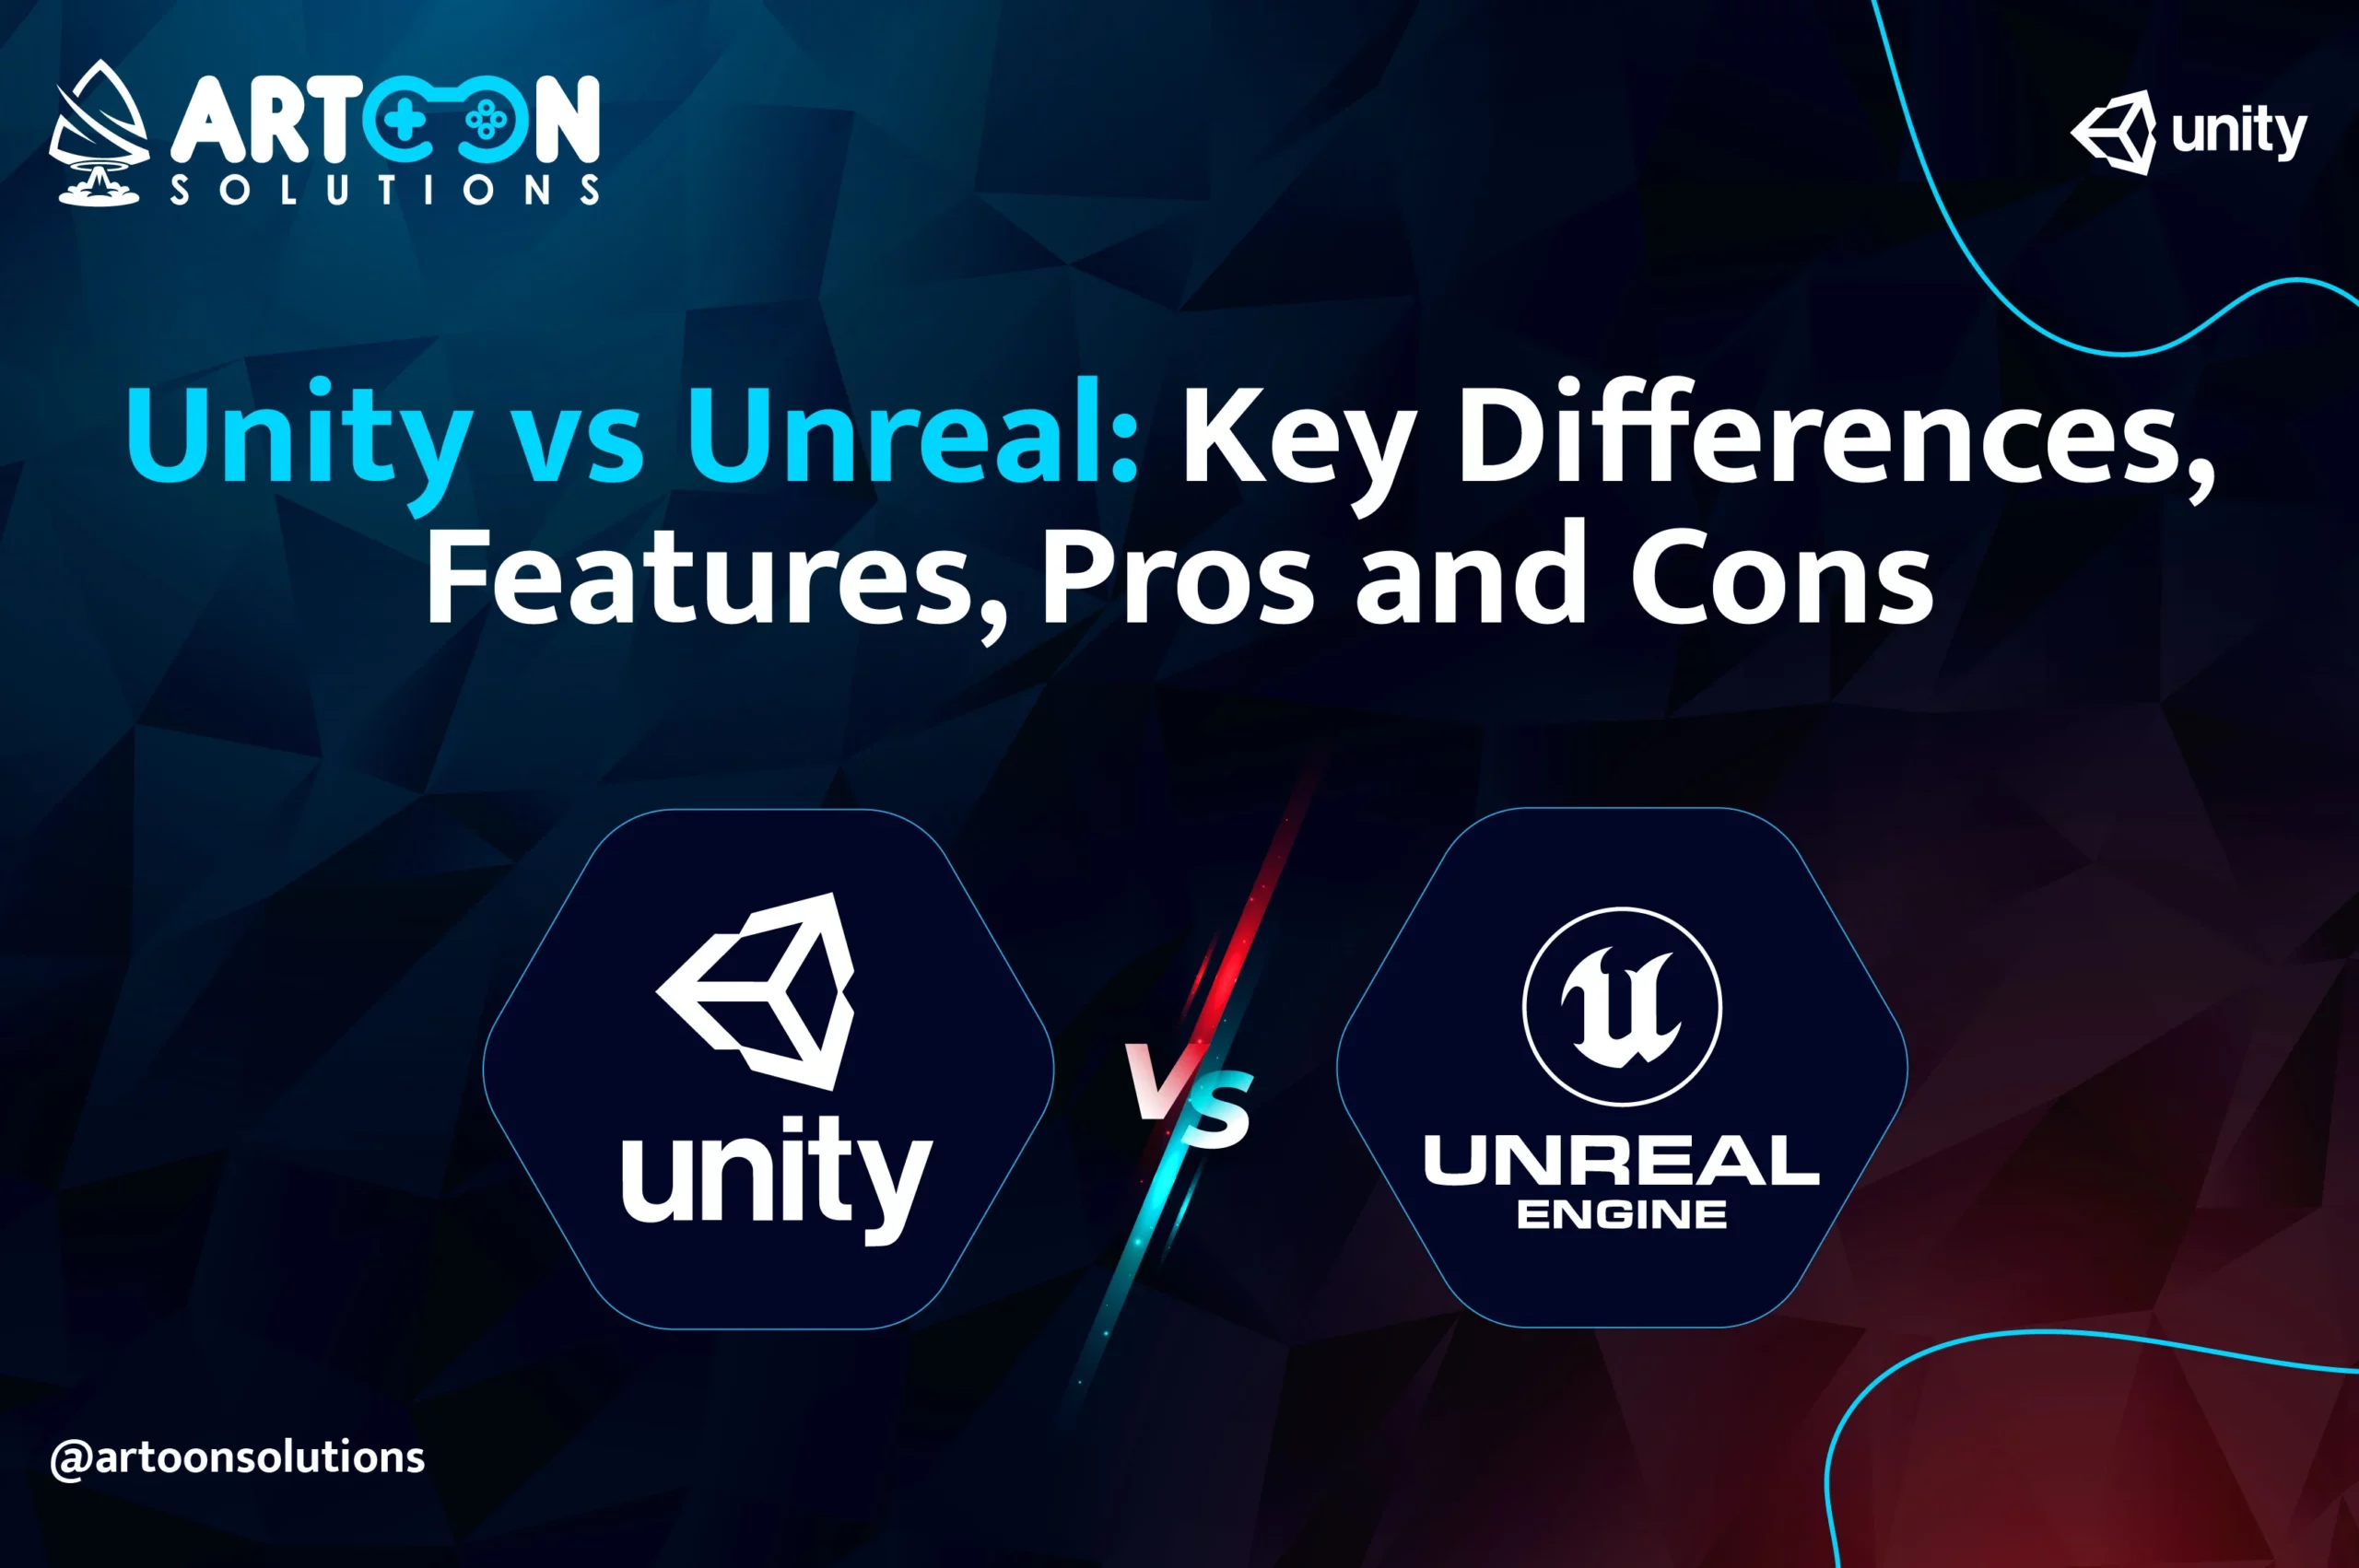 Unity vs Unreal: Key Differences, Features, Pros and Cons